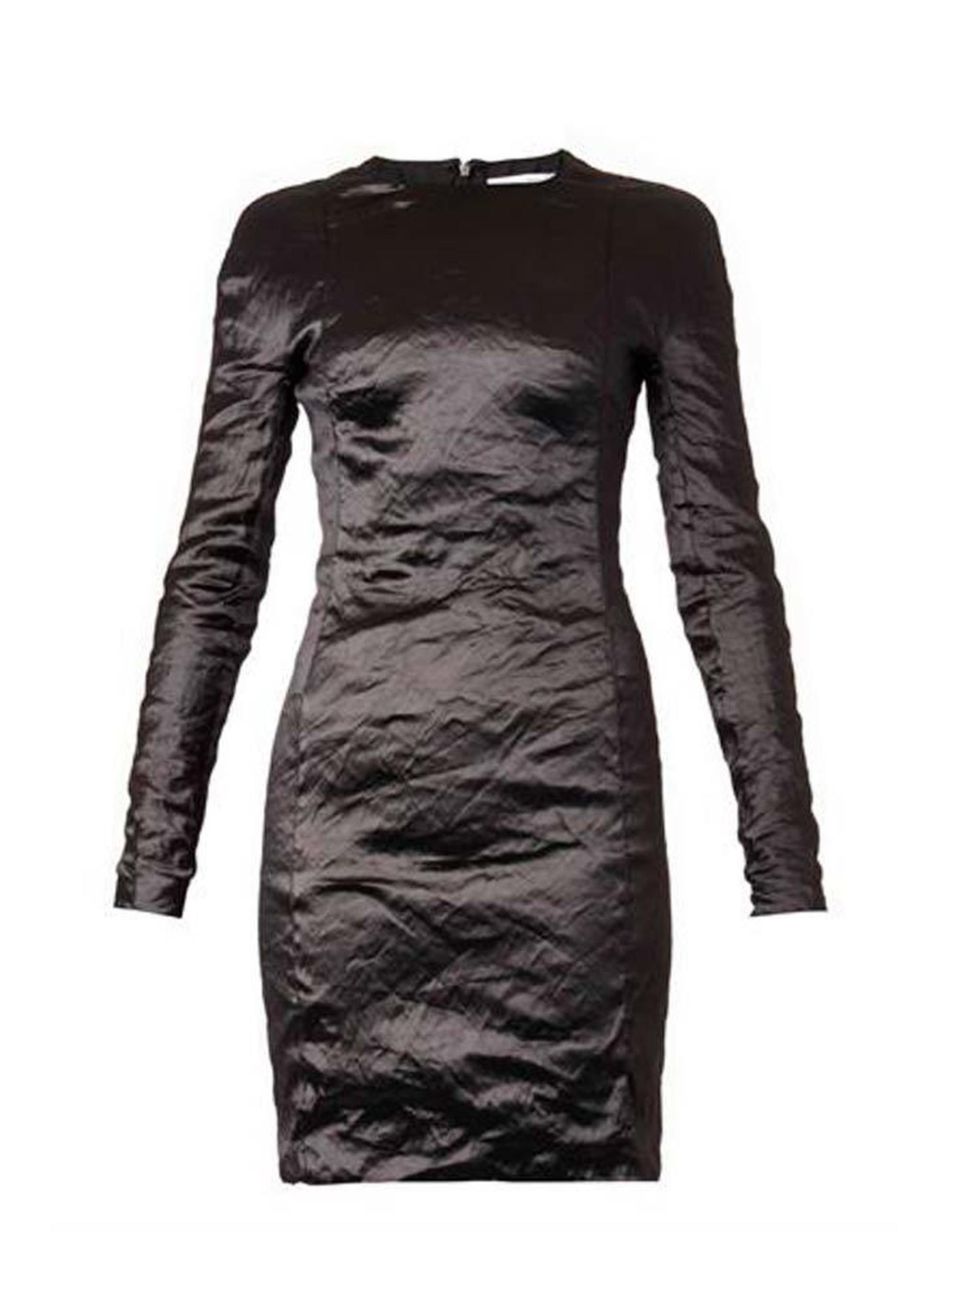 <p>Day 1 - Option two: <a href="http://www.matchesfashion.com/product/200966">Carven </a>long sleeve dress</p>